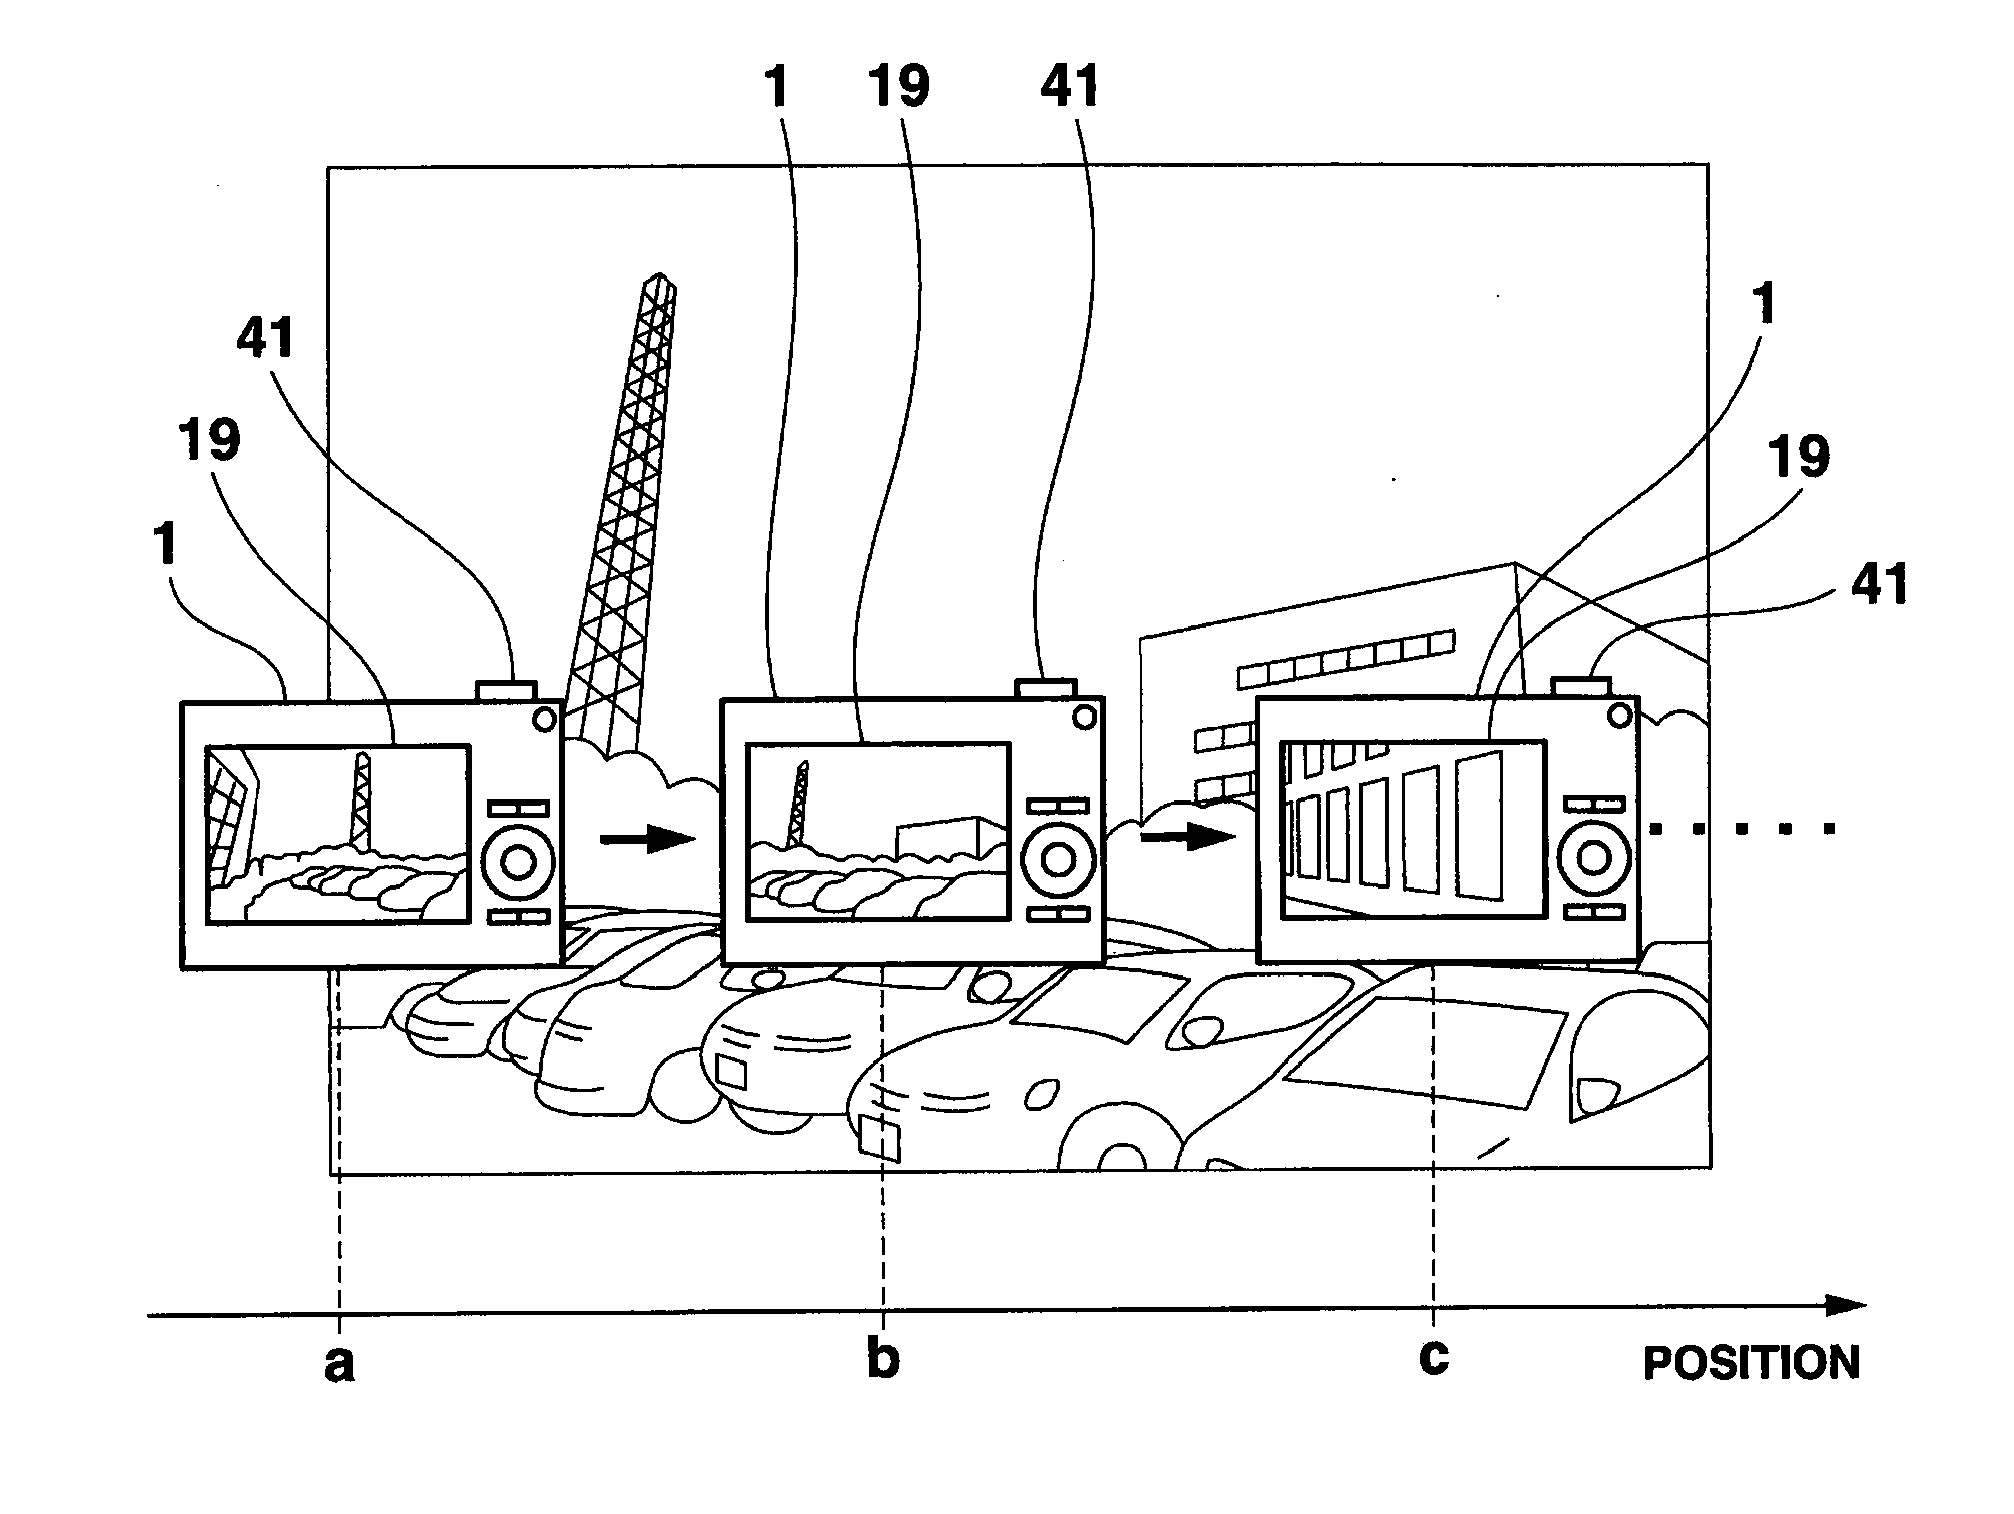 Image capturing apparatus capable of capturing panoramic image